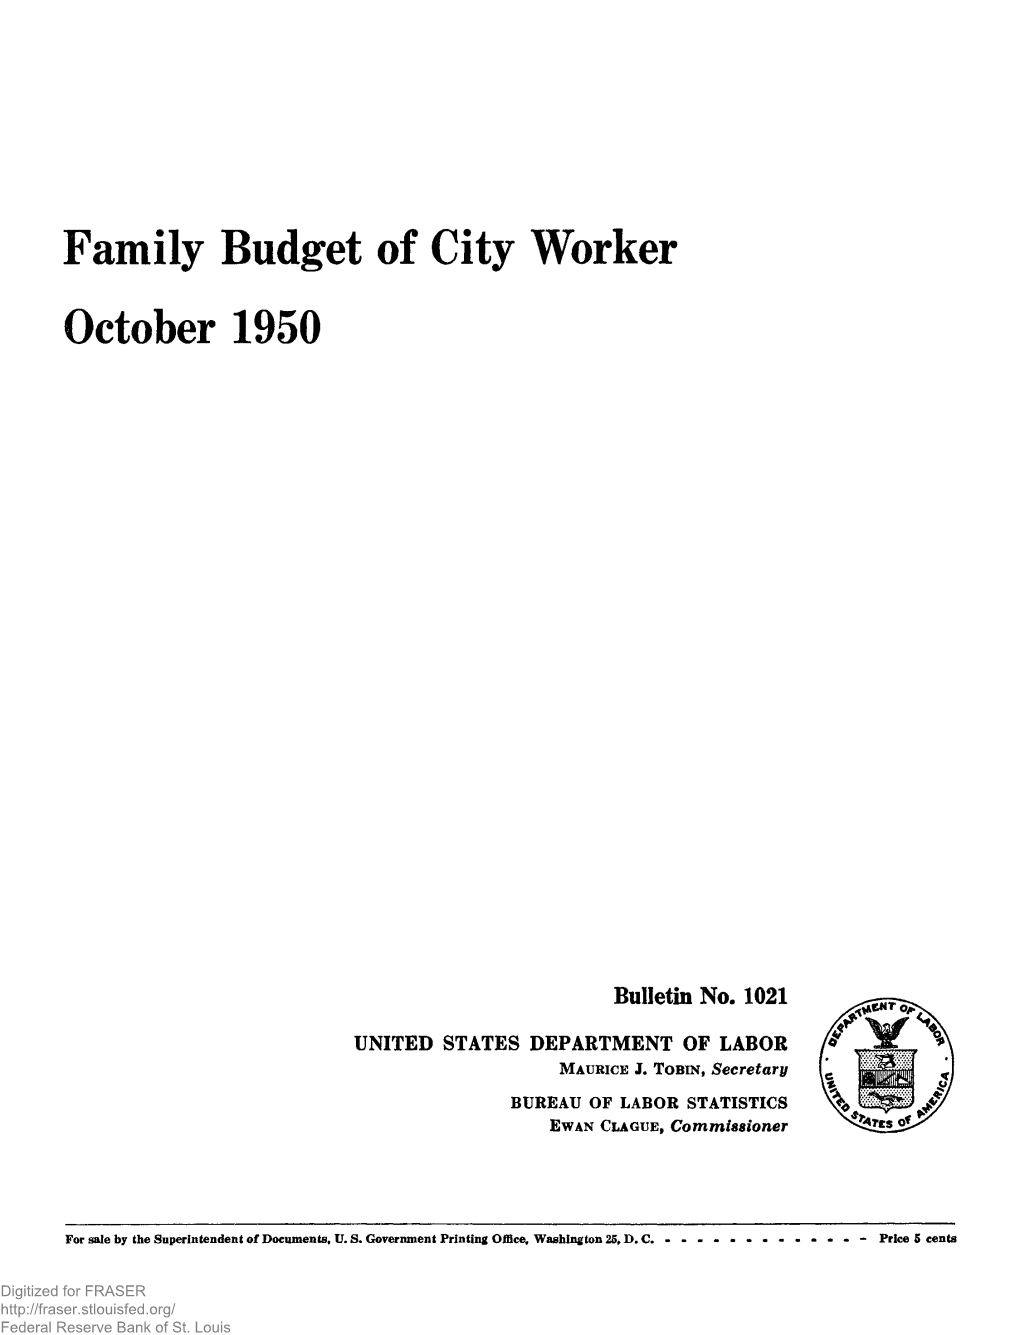 Family Budget of City Worker, October 1950